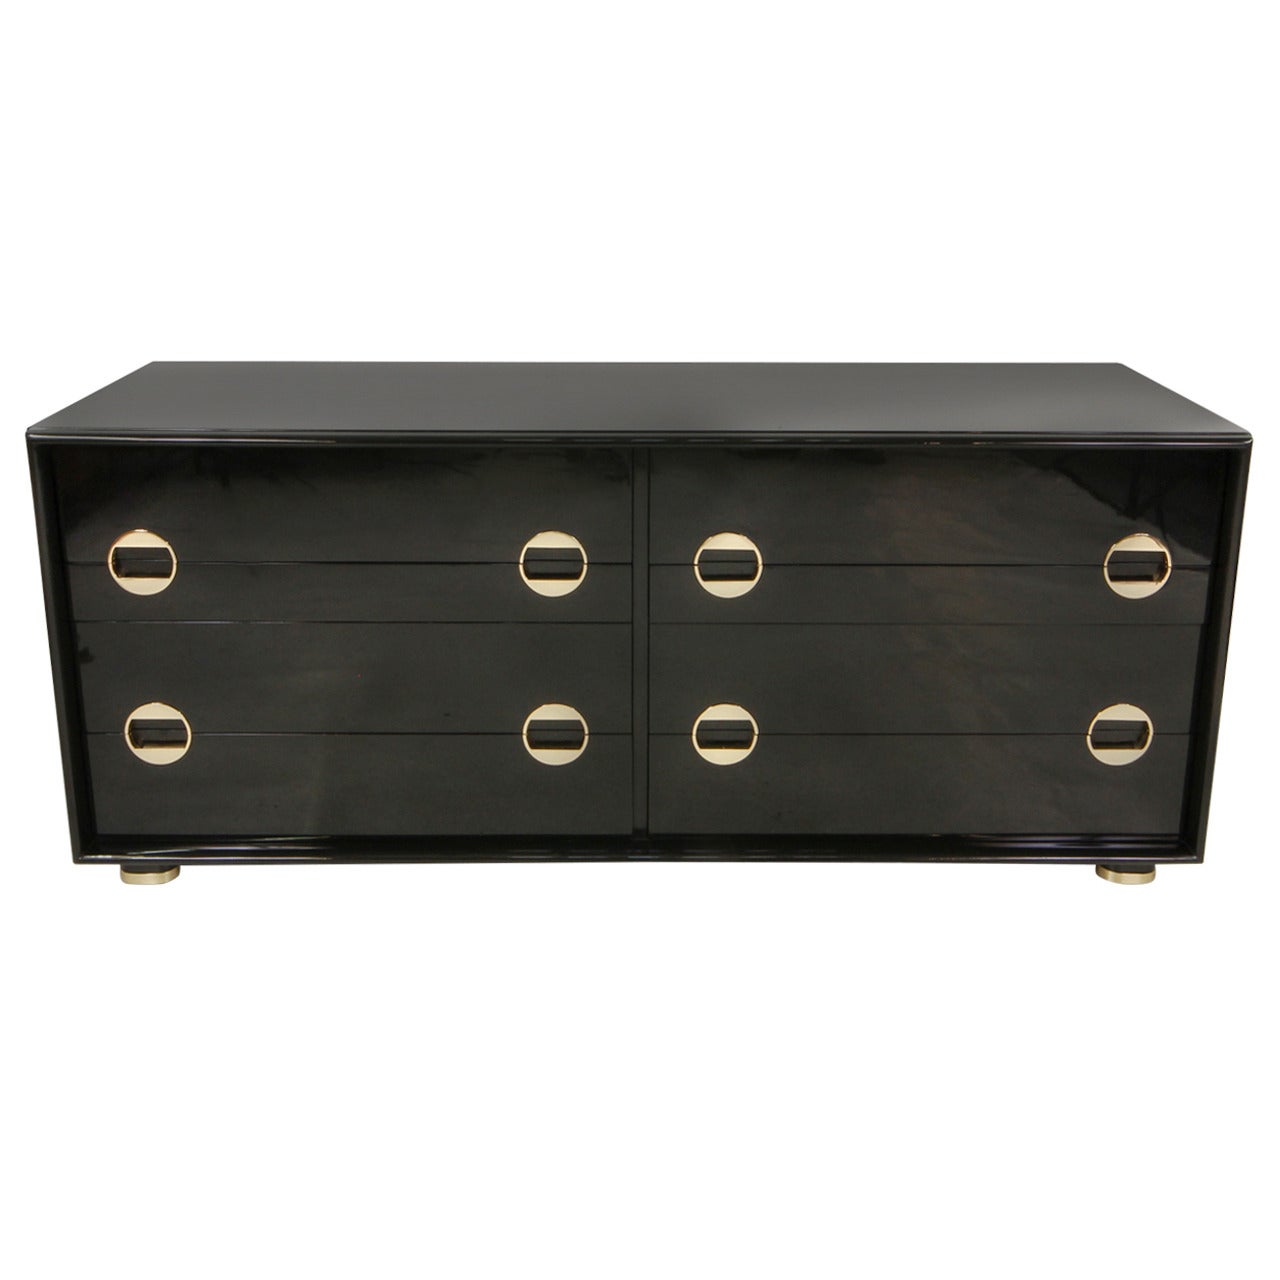 Stunning Mid-Century Modern Black Lacquer and Brass Bedroom Set For Sale